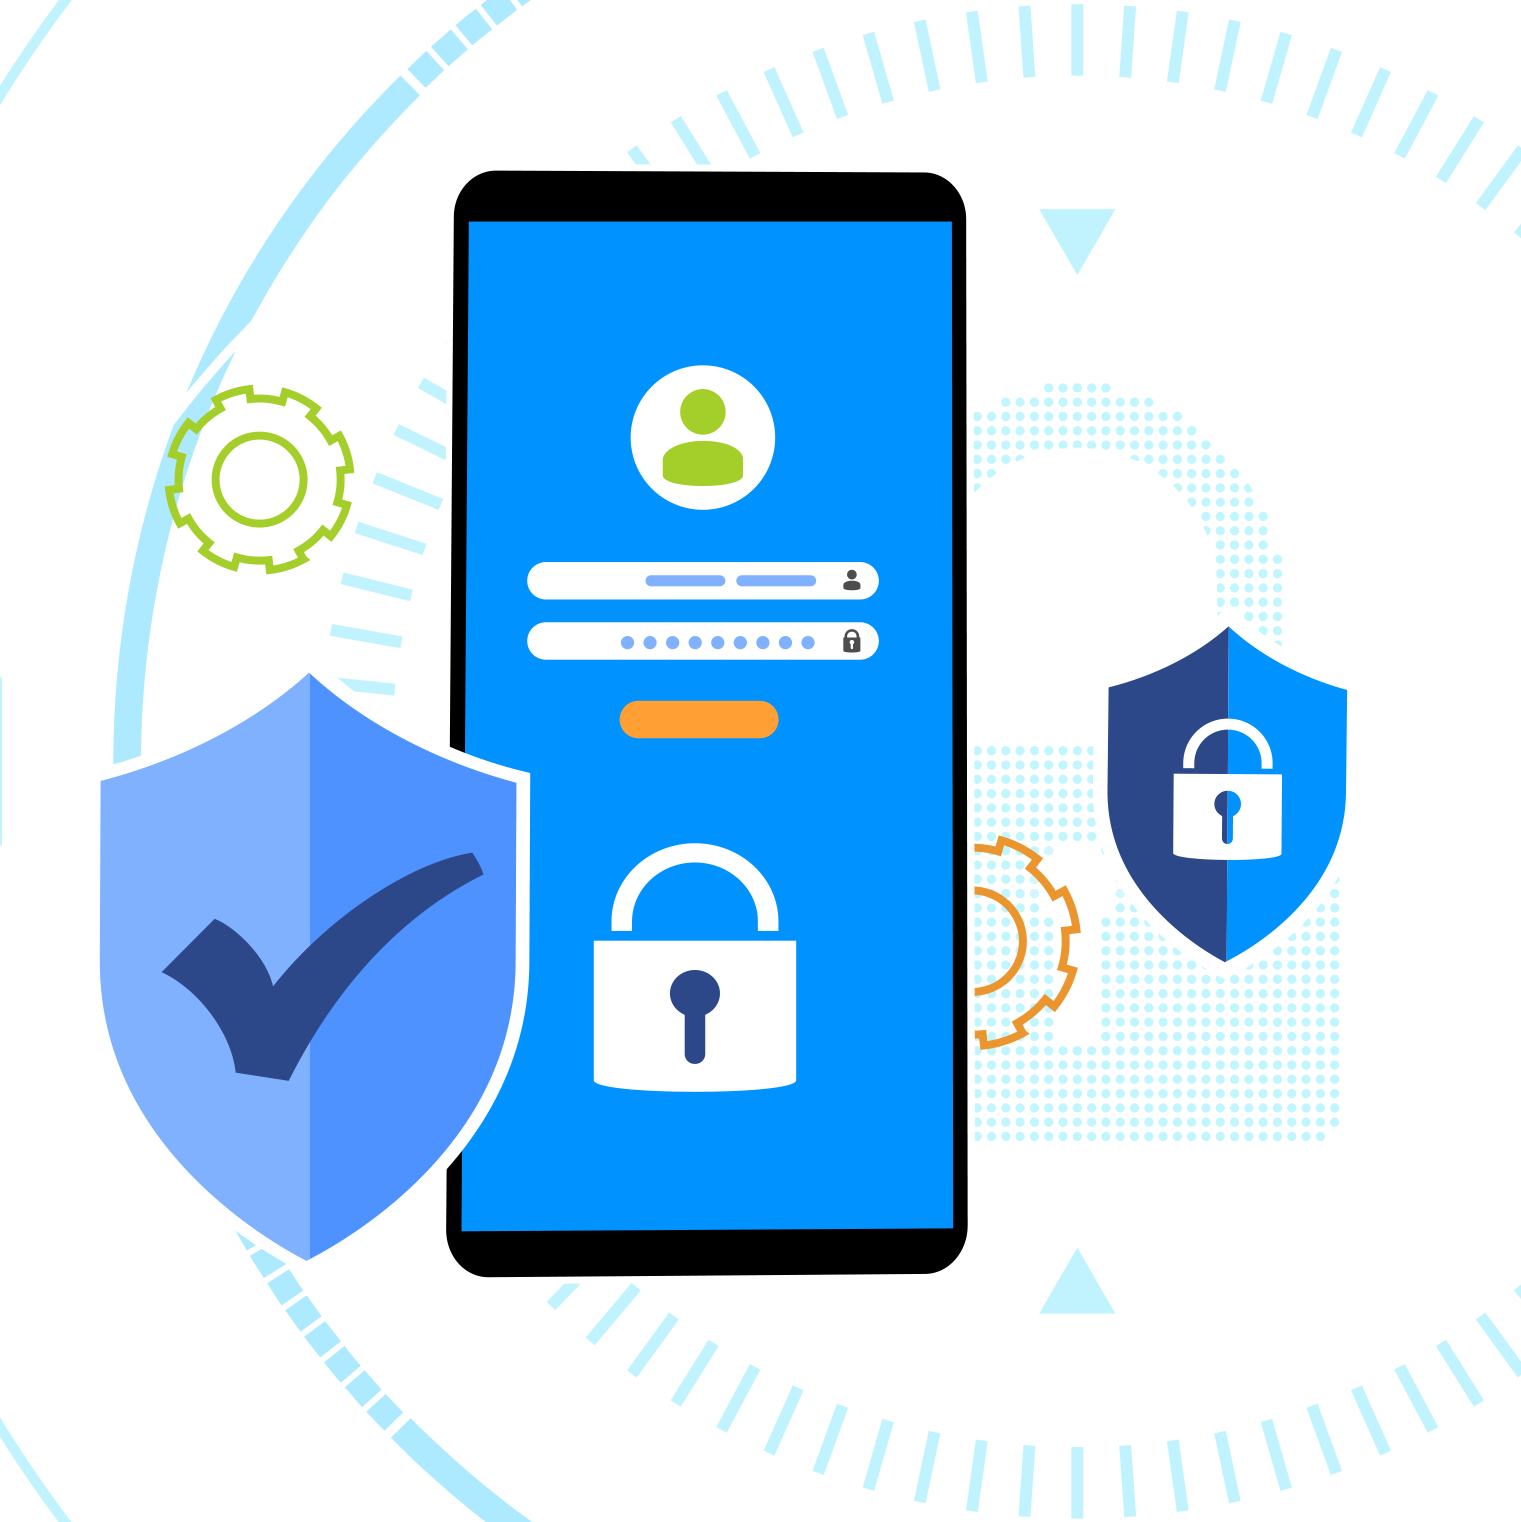 Mobile screen protected with multi-factor authentication.